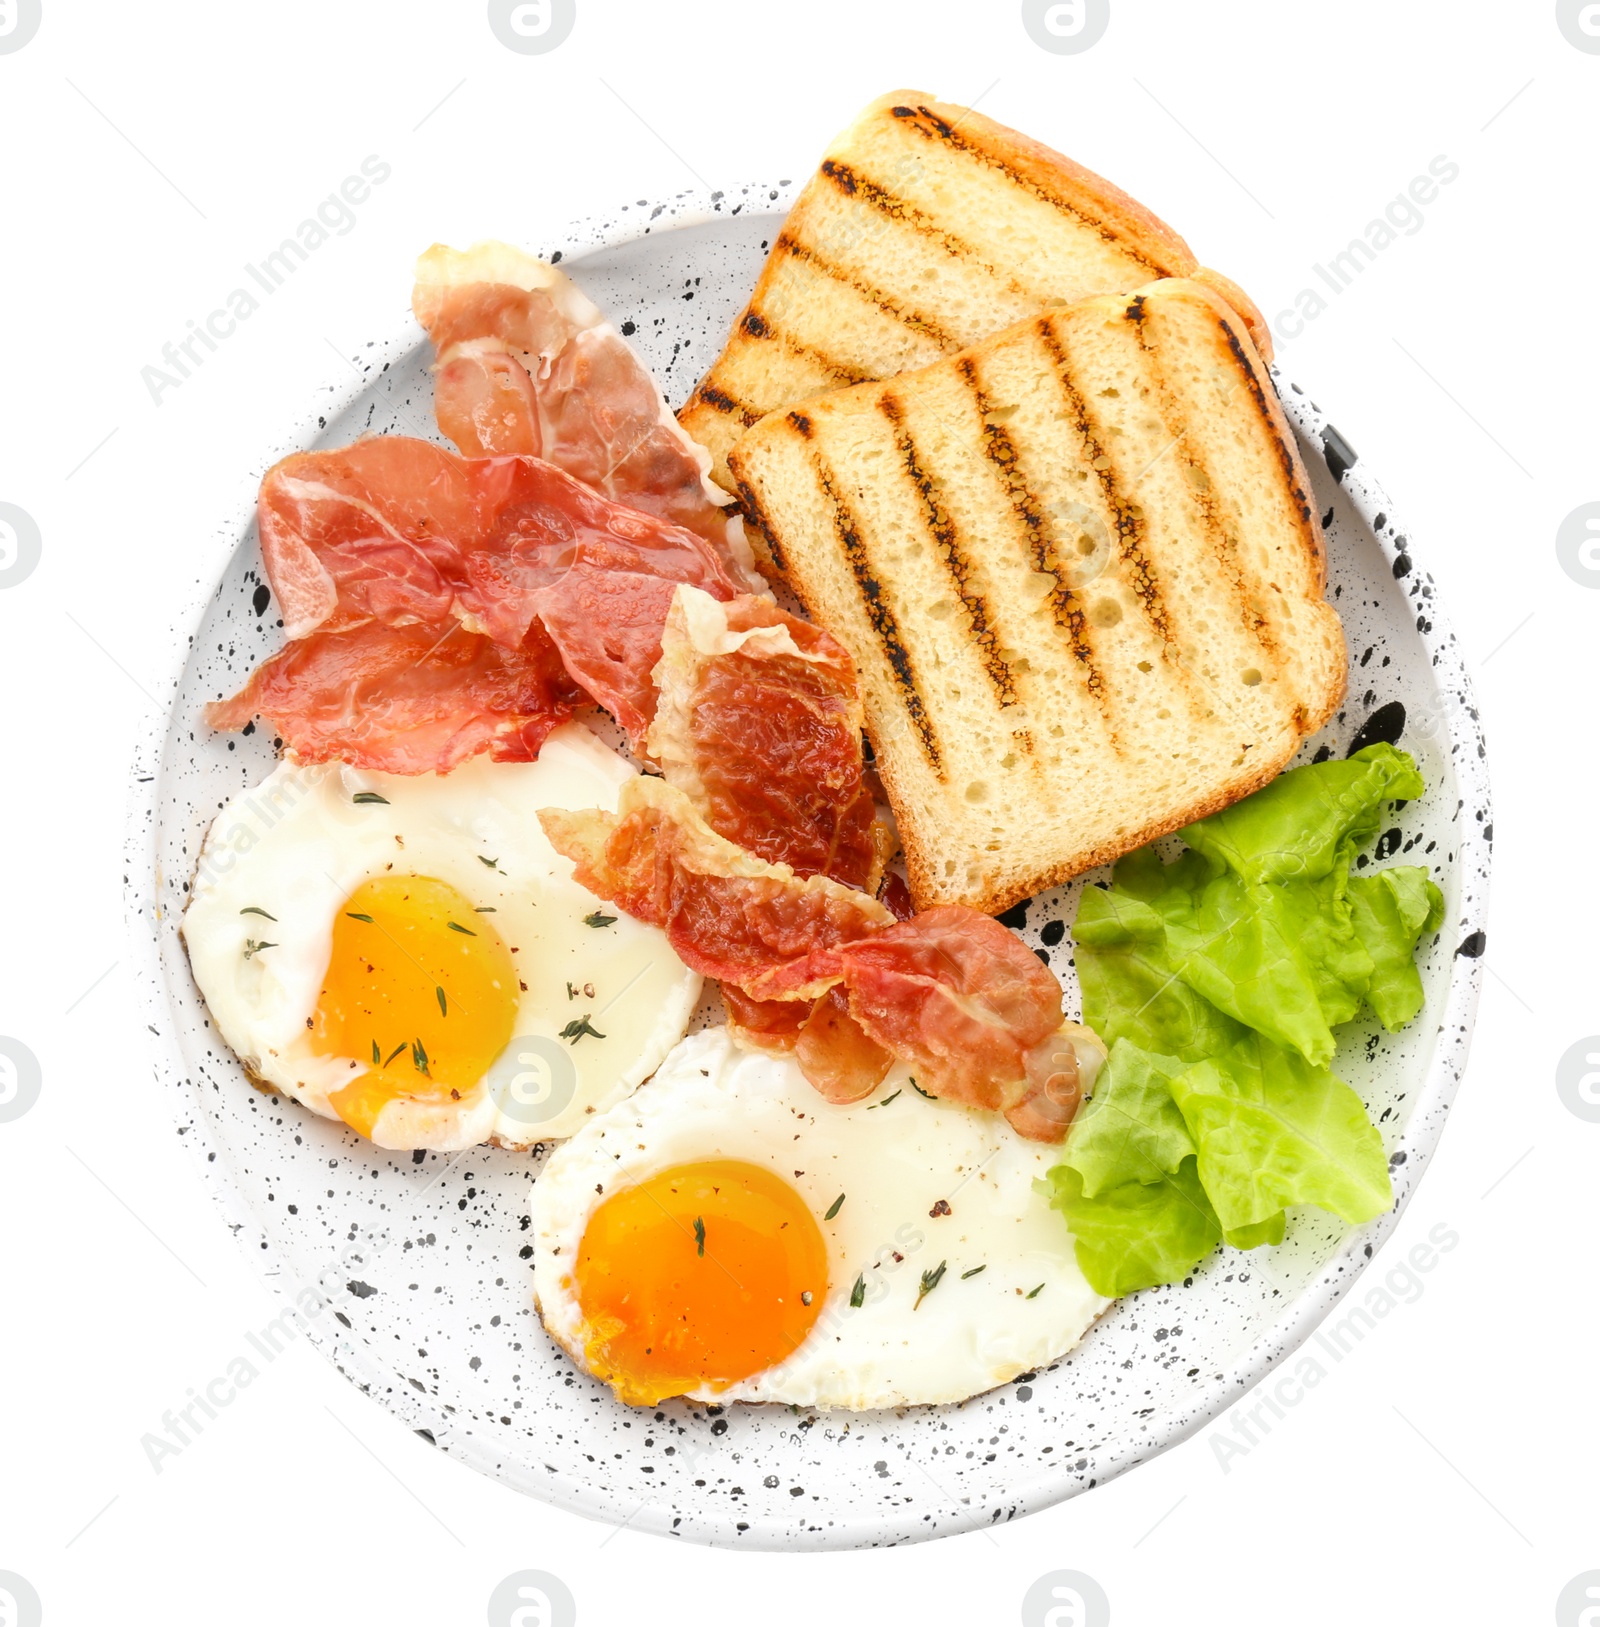 Photo of Plate with fried eggs, bacon, toasts and lettuce on white background